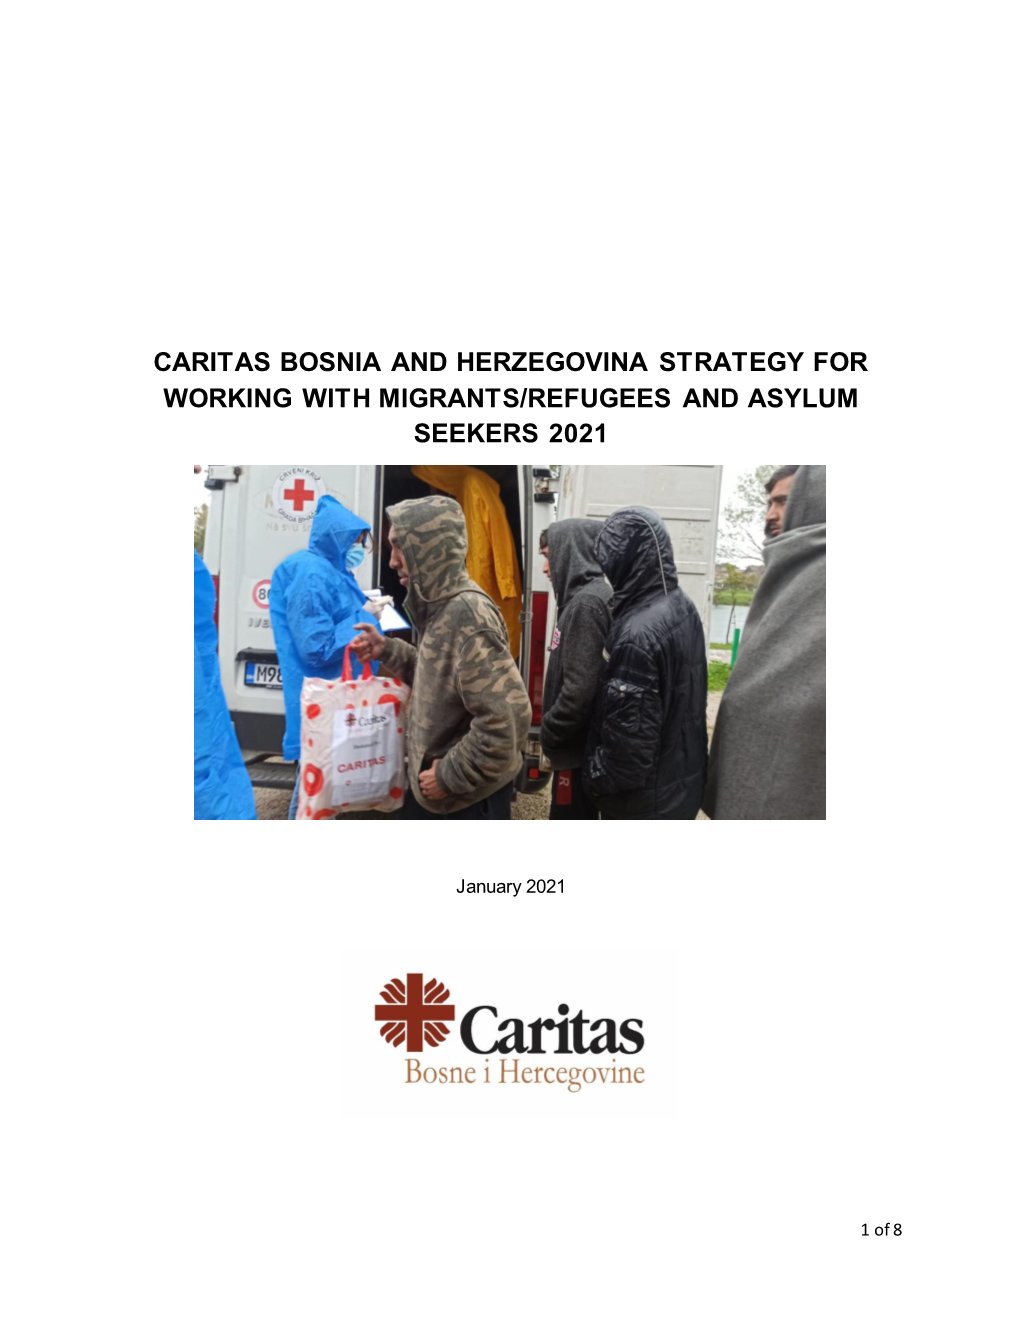 Caritas Bosnia and Herzegovina Strategy for Working with Migrants/Refugees and Asylum Seekers 2021